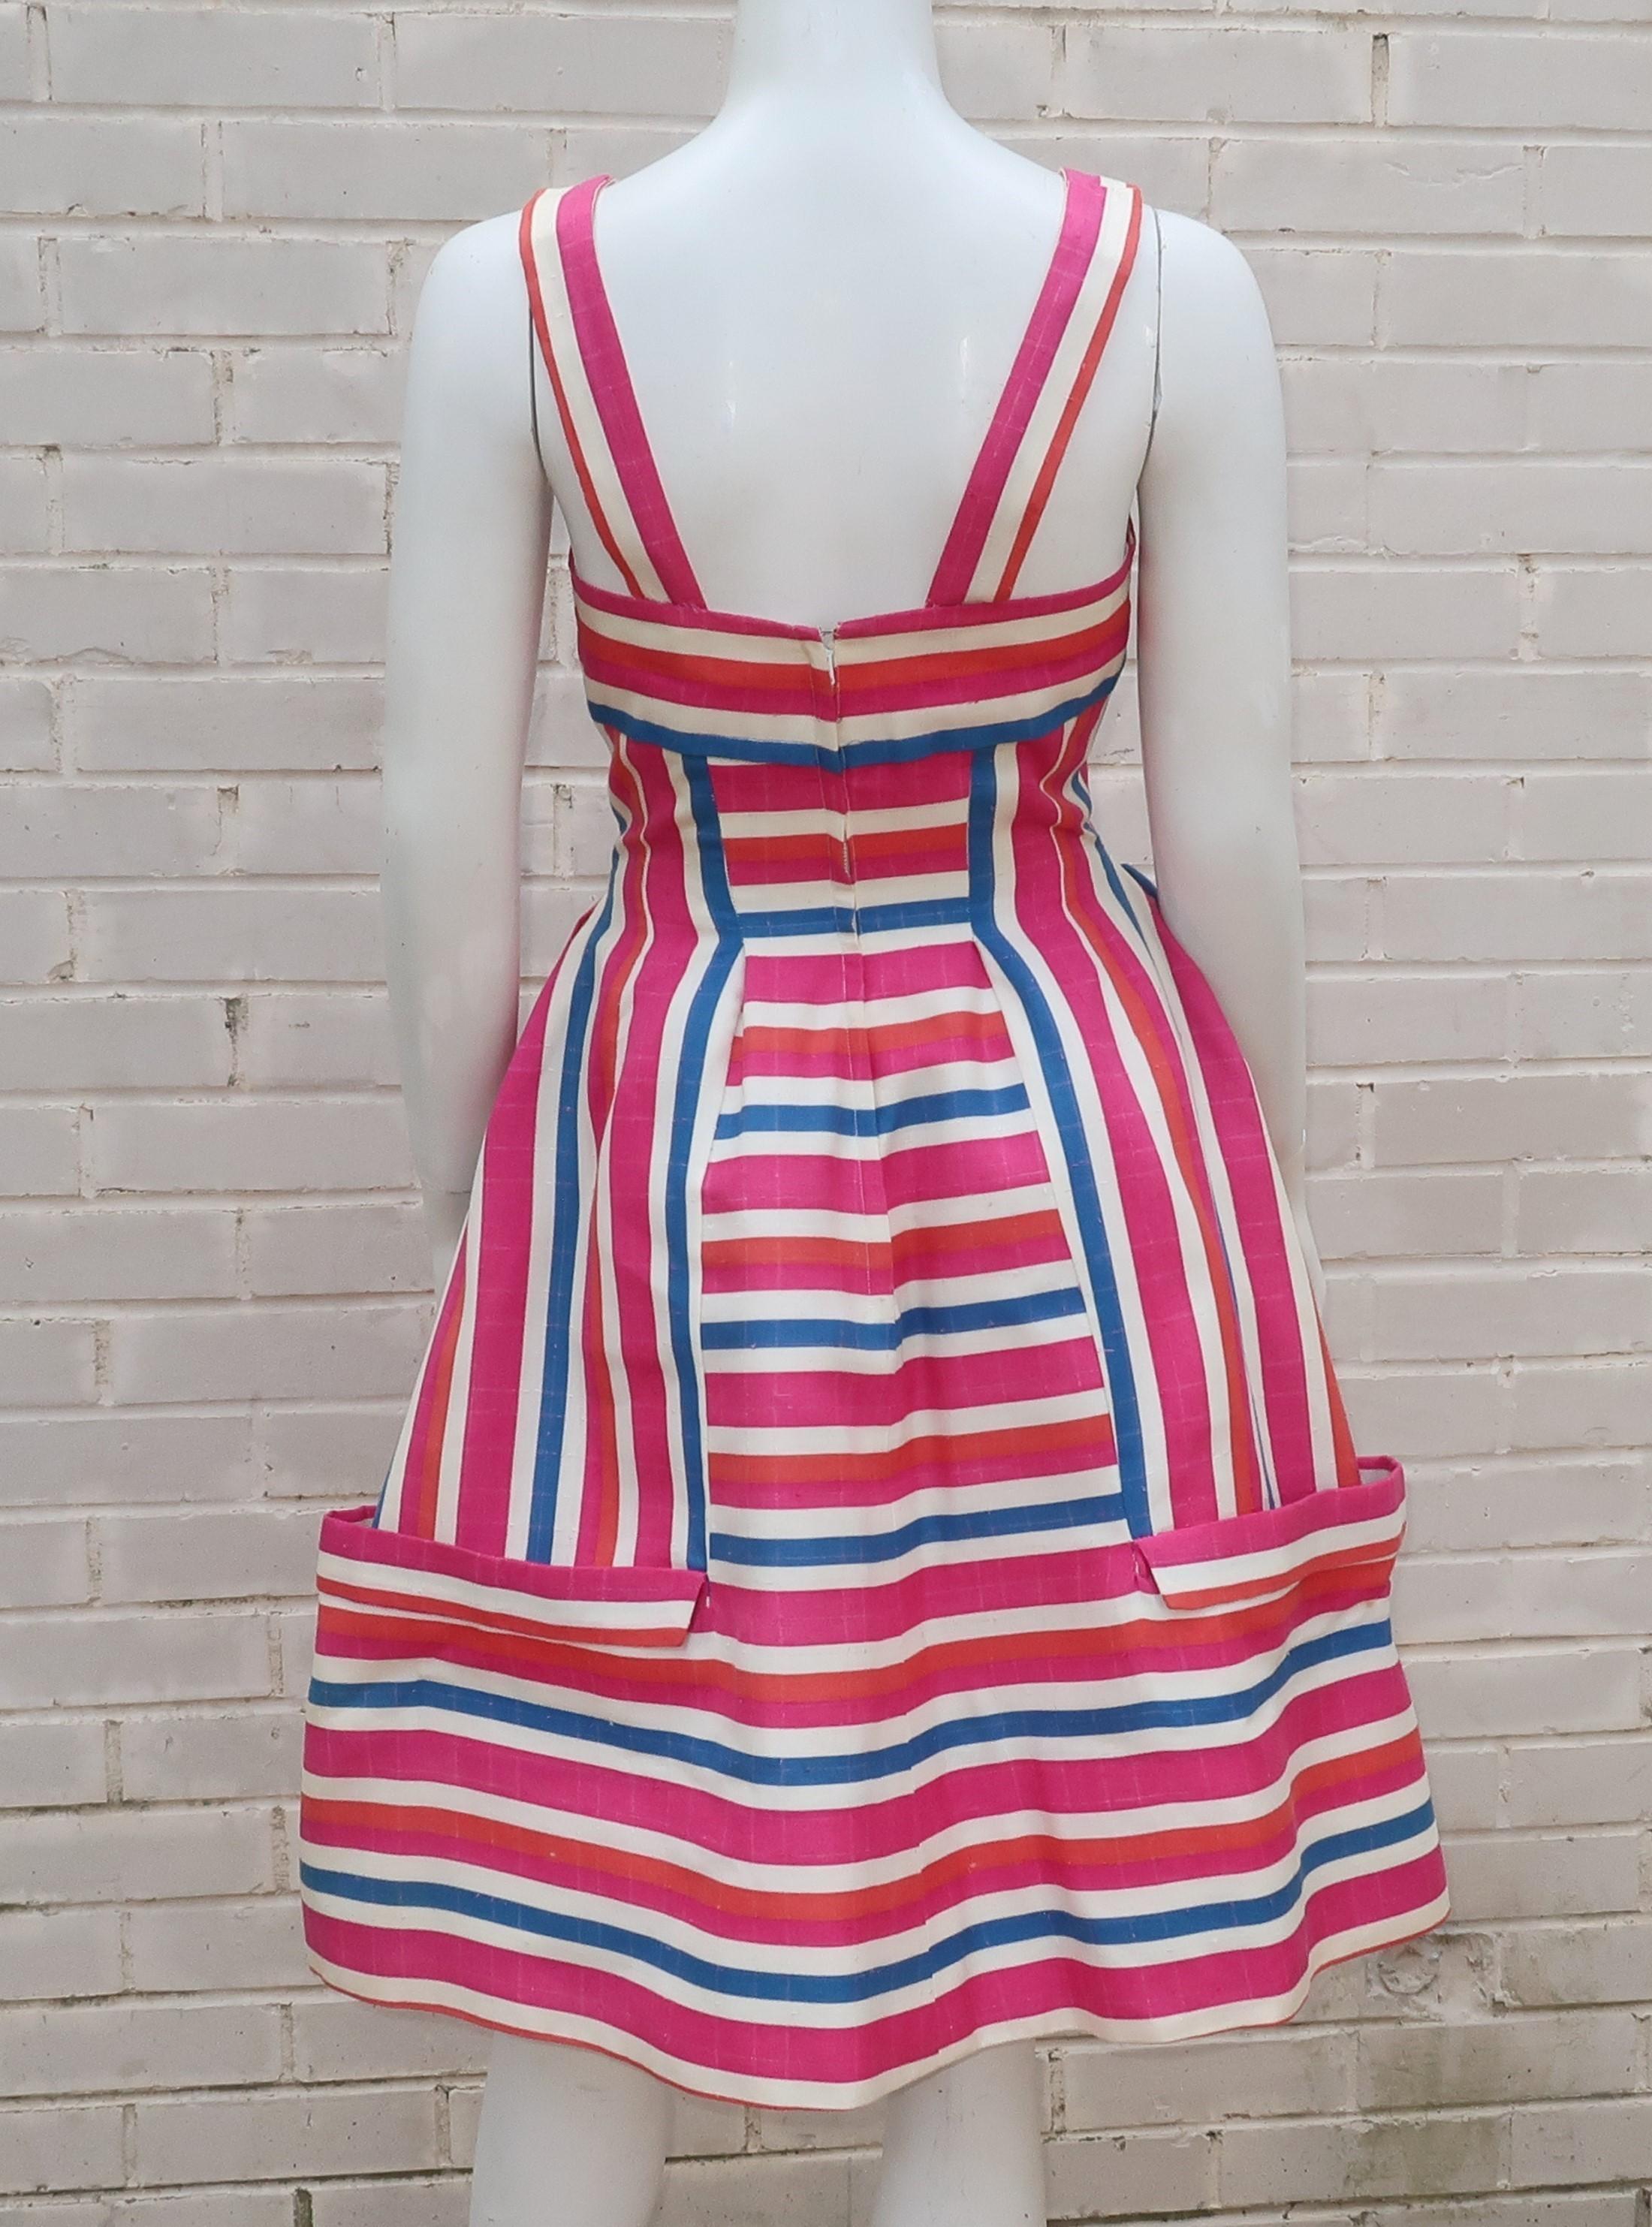 Striped Linen Sun Dress With Built-in Crinoline, C.1960 For Sale 4